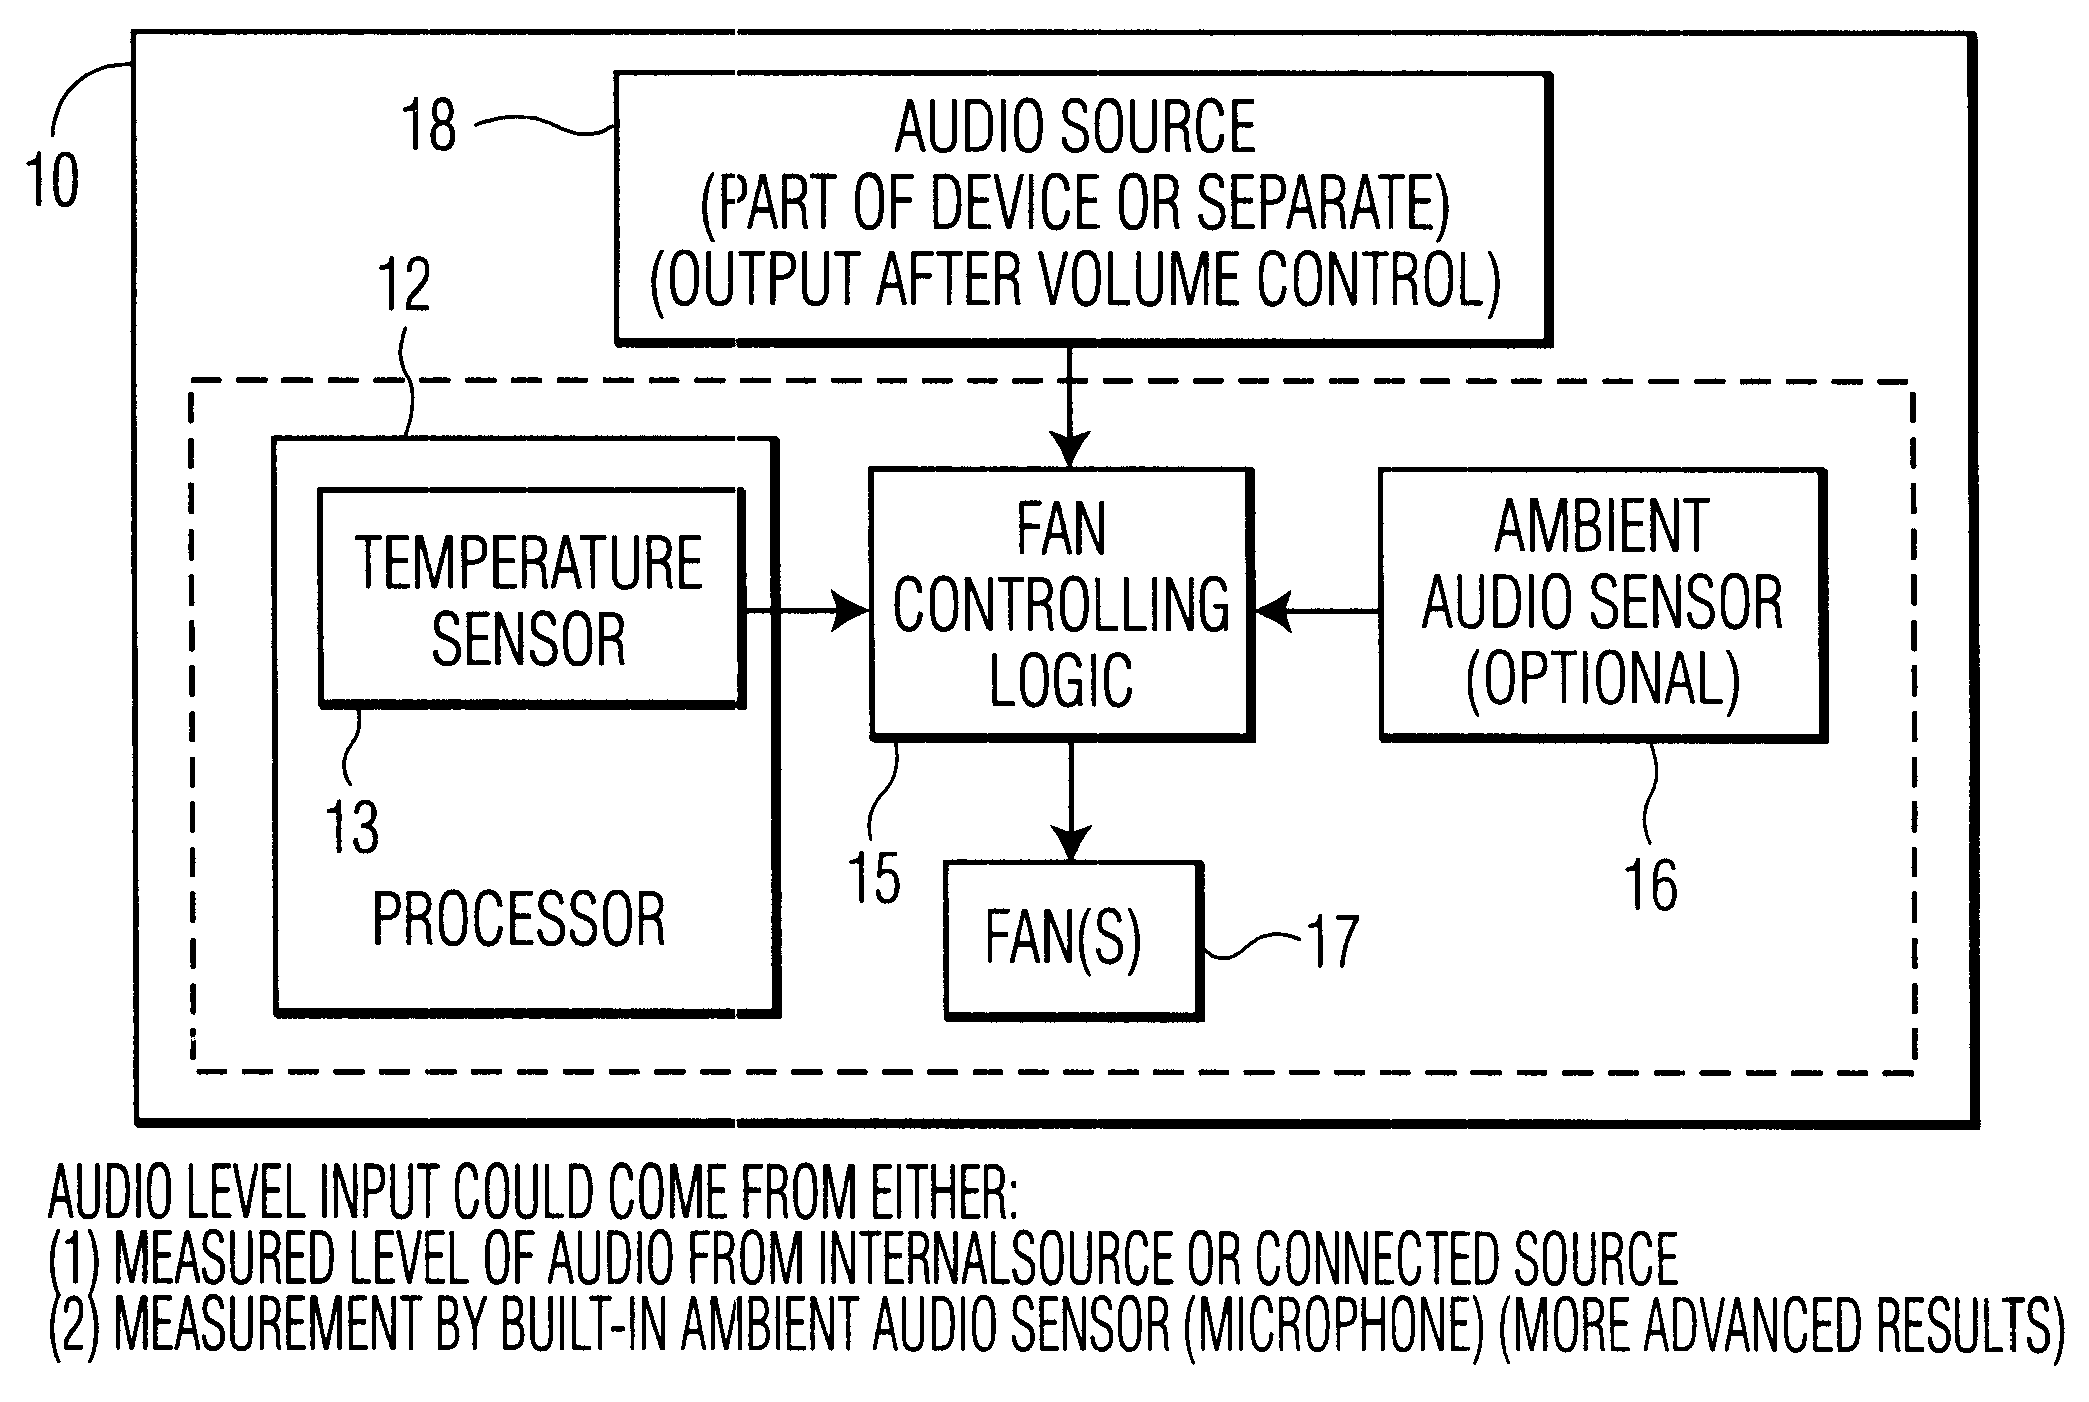 Cooling fan in sync with audio output level